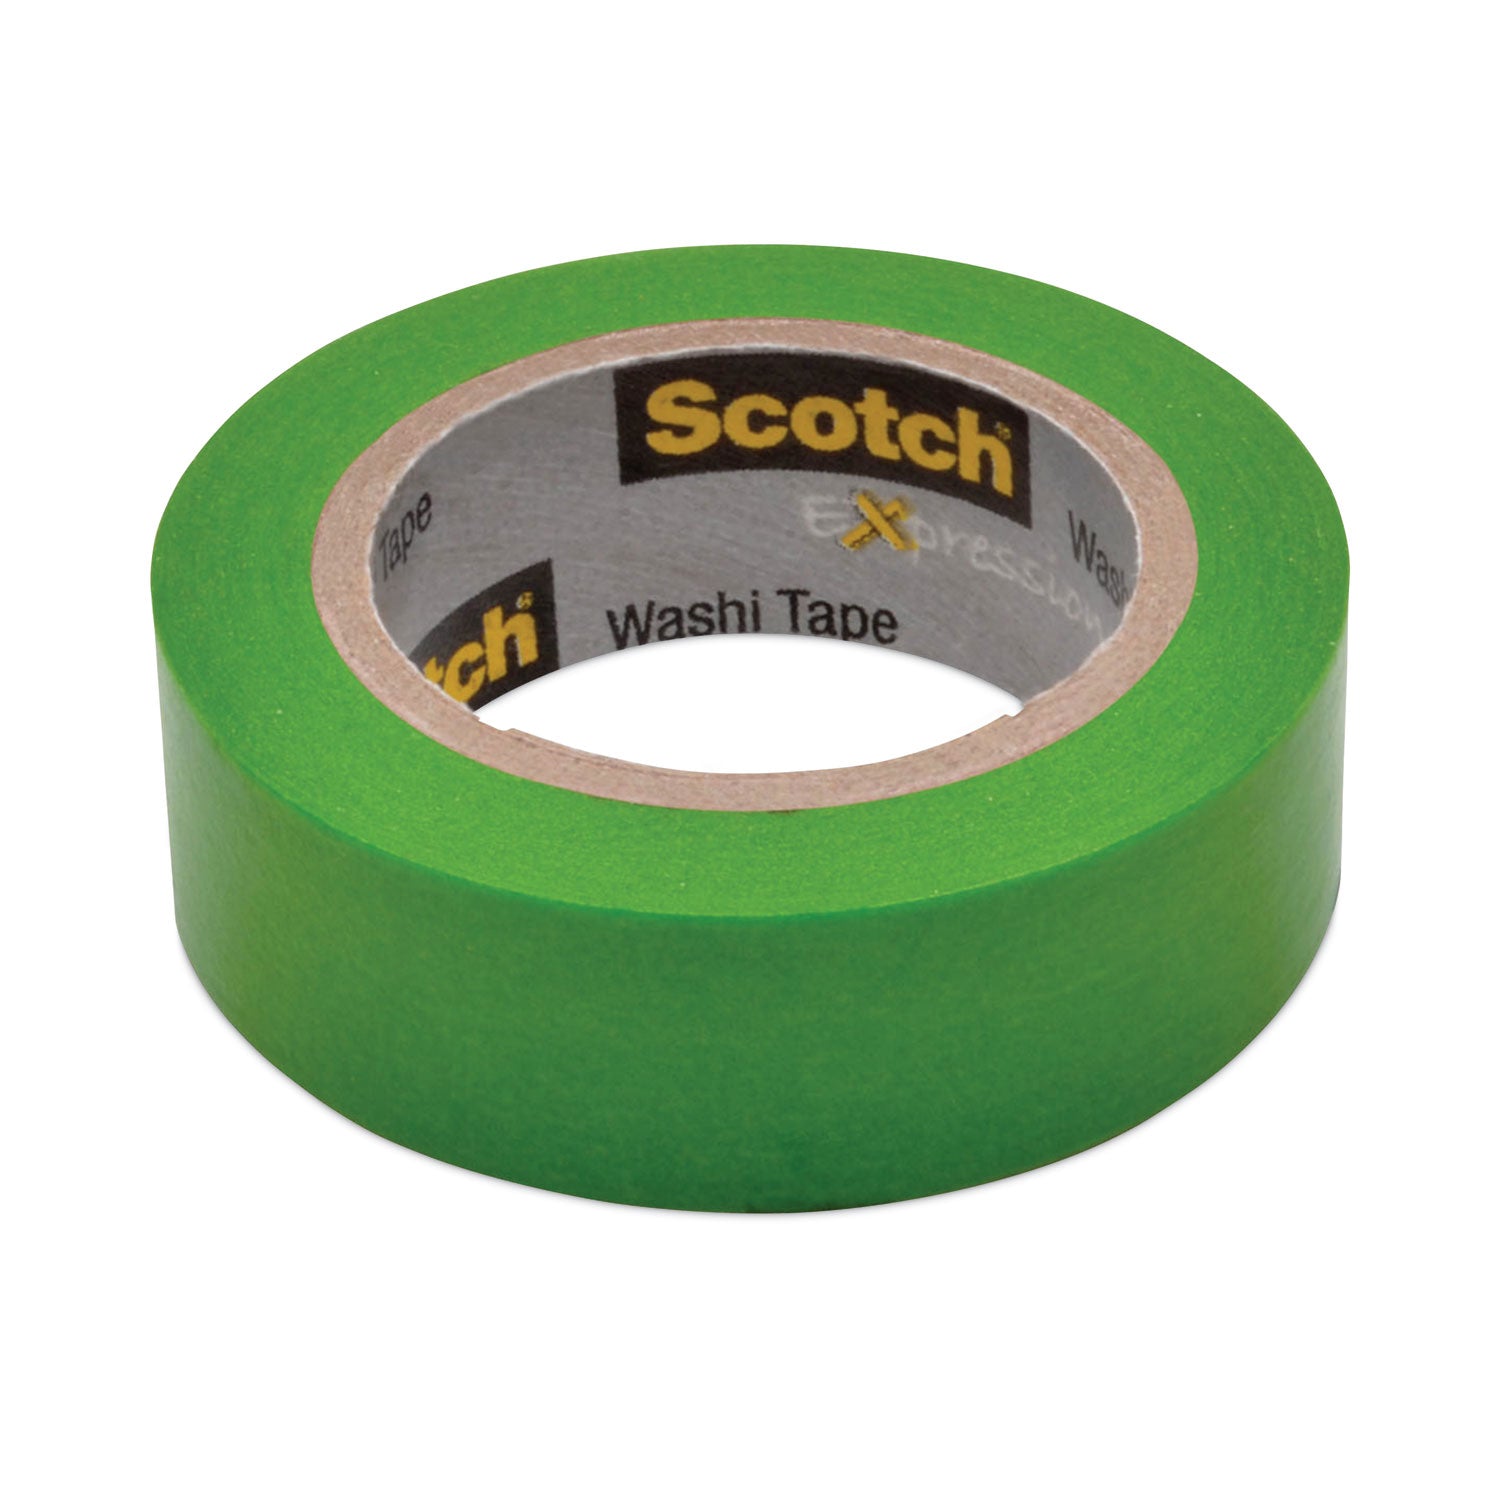 expressions-washi-tape-125-core-059-x-3275-ft-green_mmm70005188761 - 2